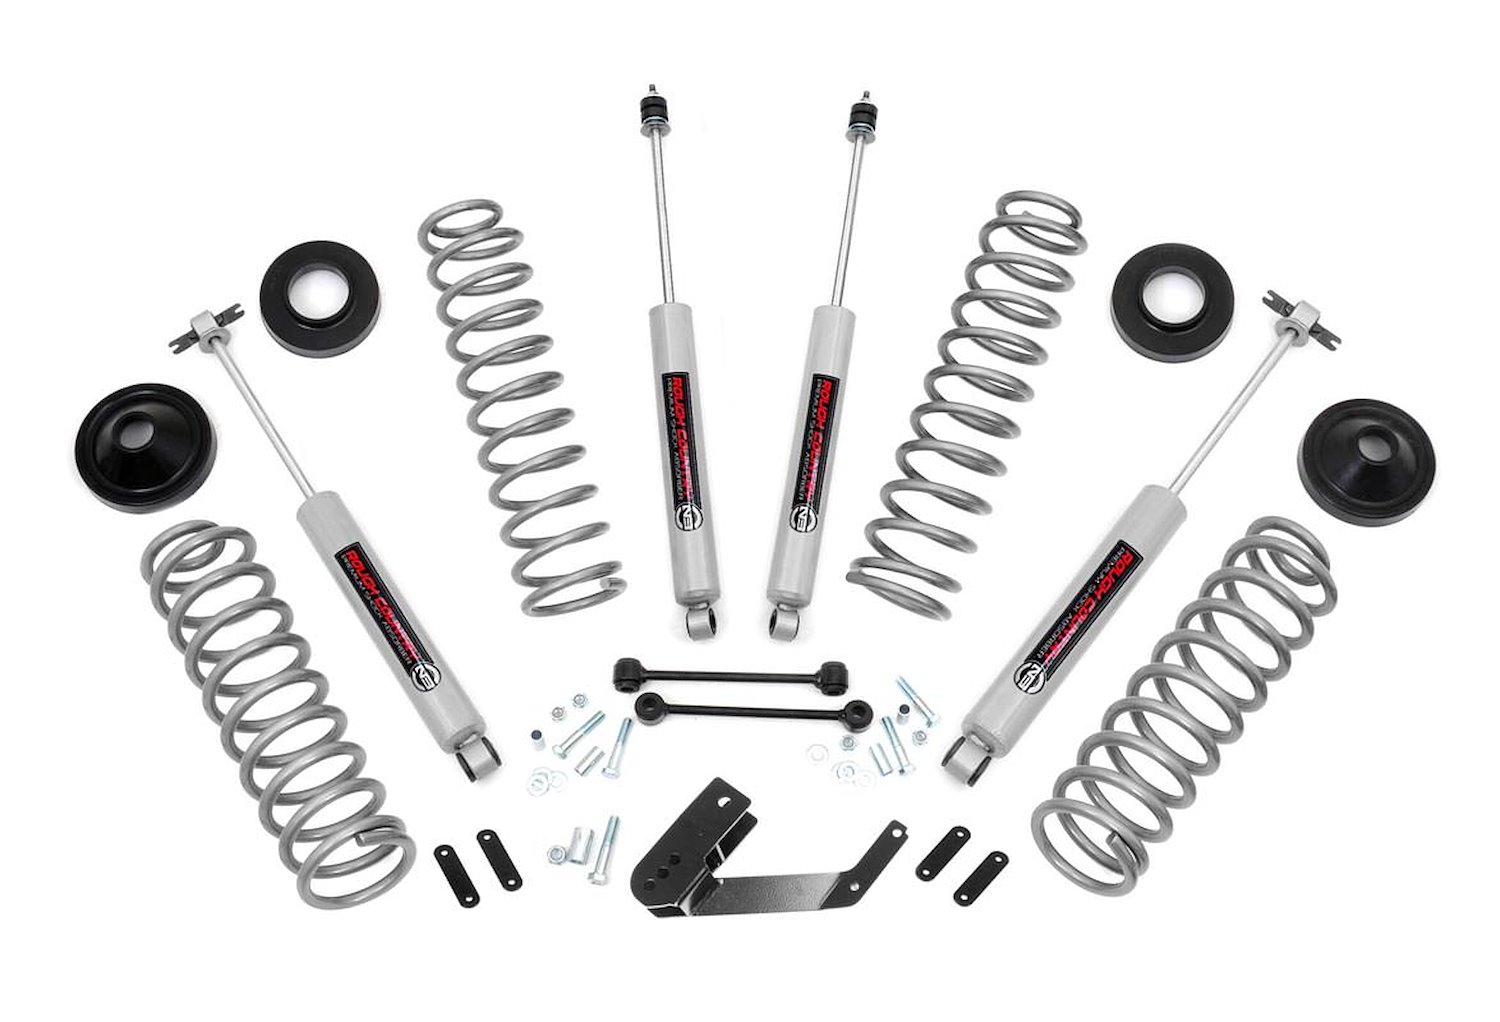 PERF693 Front and Rear Suspension Lift Kit, Lift Amount: 3.25 in. Front/3.25 in. Rear